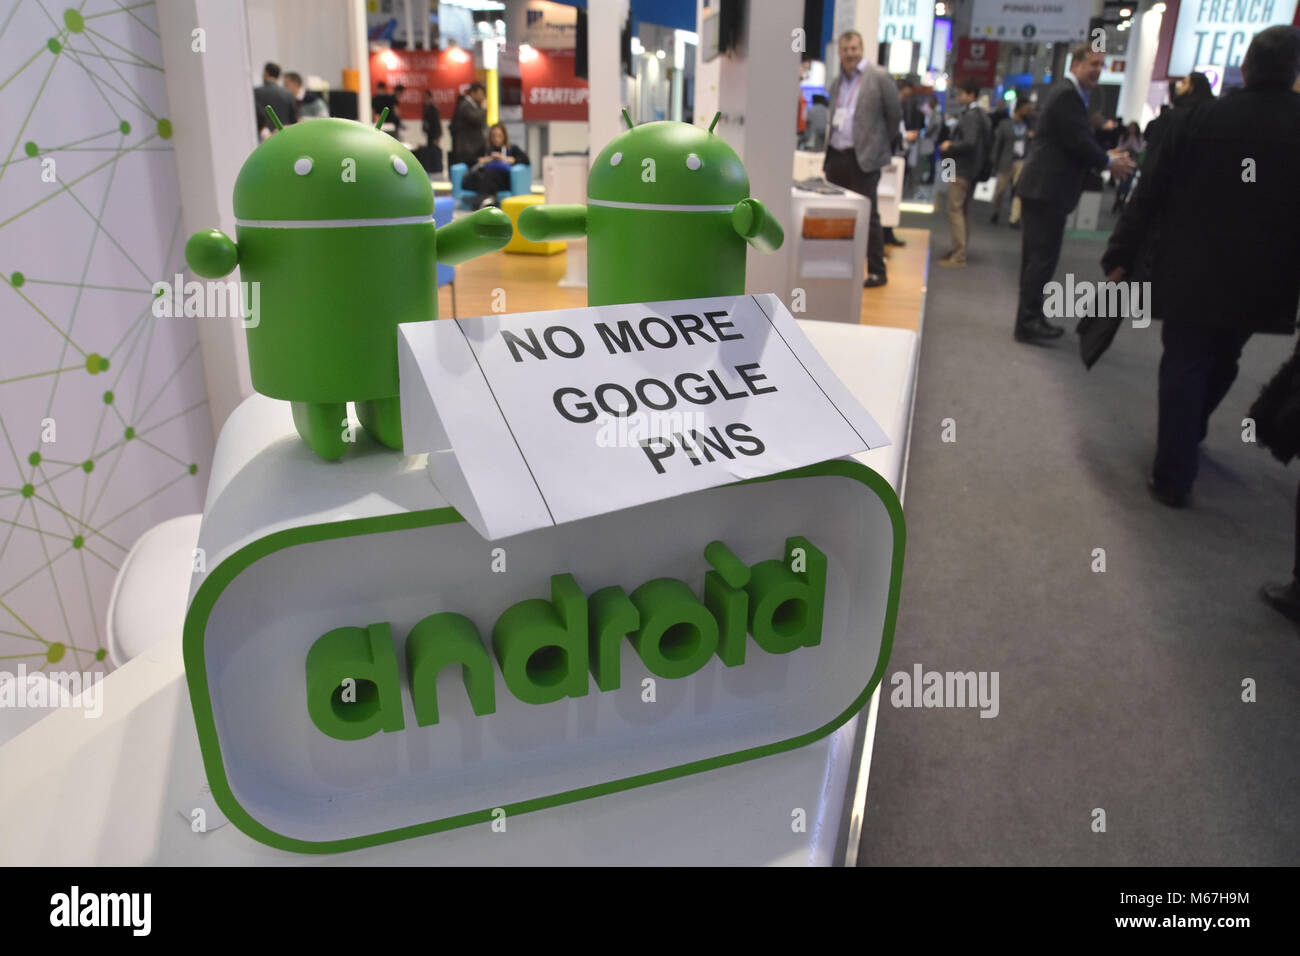 Barcelona, Spain. 1st Mar, 2018. A stand alert from Android seen at the Mobile World Congress 2018 in Barcelona.The Mobile World Congress 2018 is being hosted in Barcelona from 26 February to 1st March. Credit: Last Day of the Mobile World Congress in Barcelona  2 .jpg/SOPA Images/ZUMA Wire/Alamy Live News Stock Photo